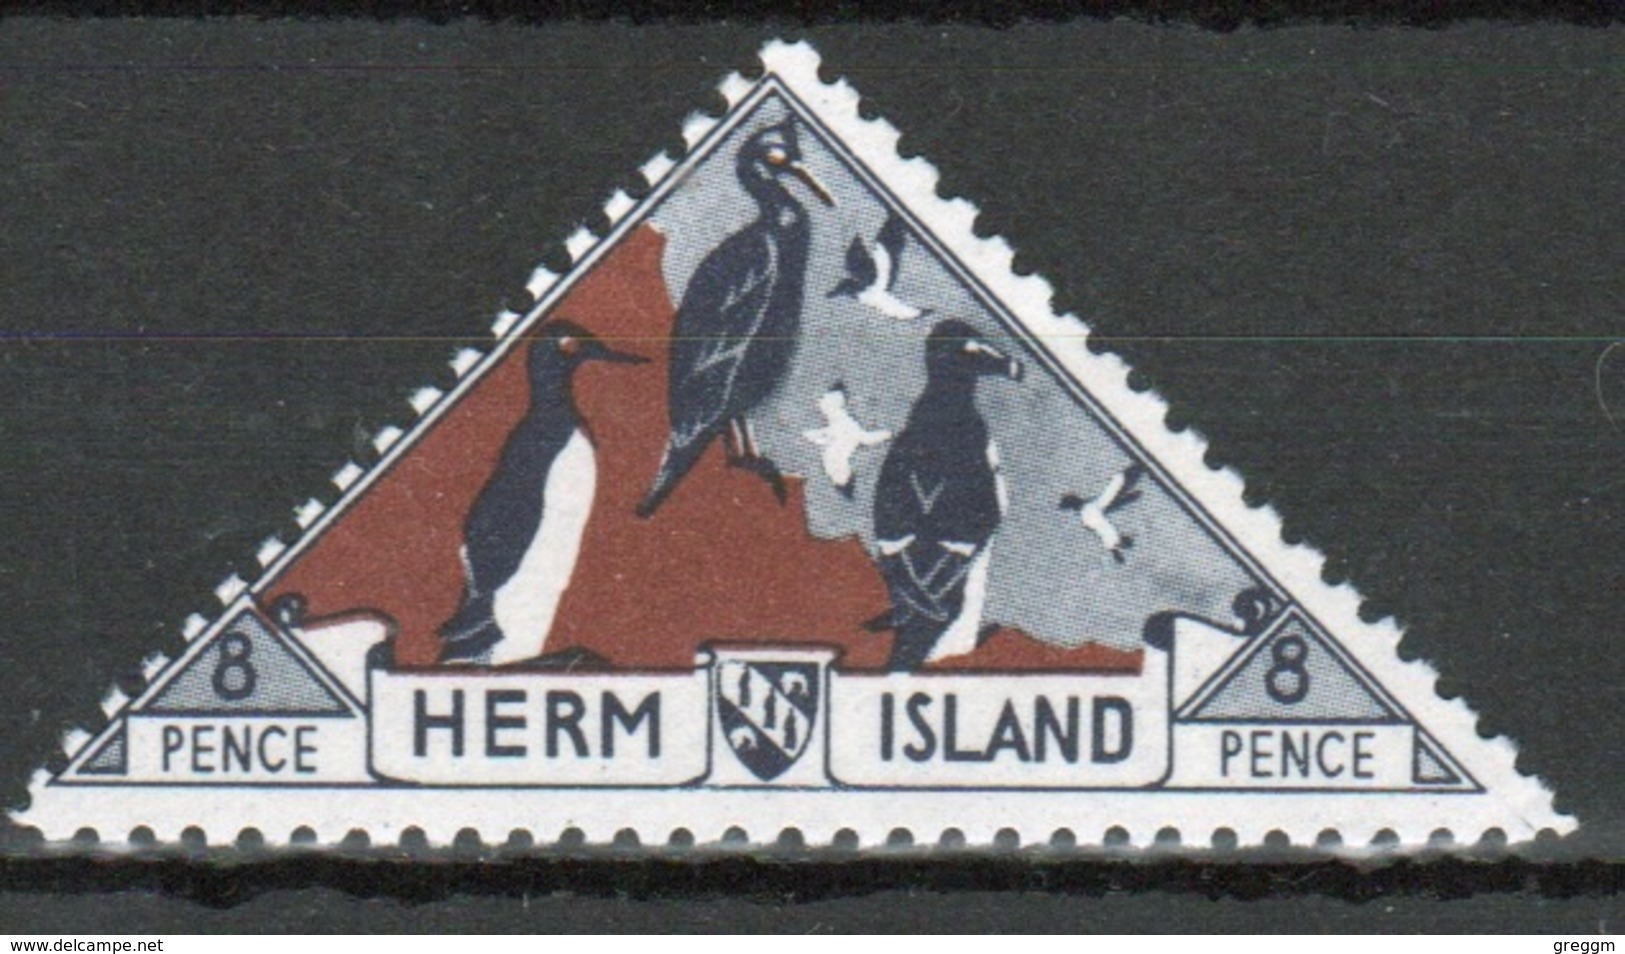 Herm Island 1954 Single 8d Stamp Celebrating Fauna And Nature. - Local Issues